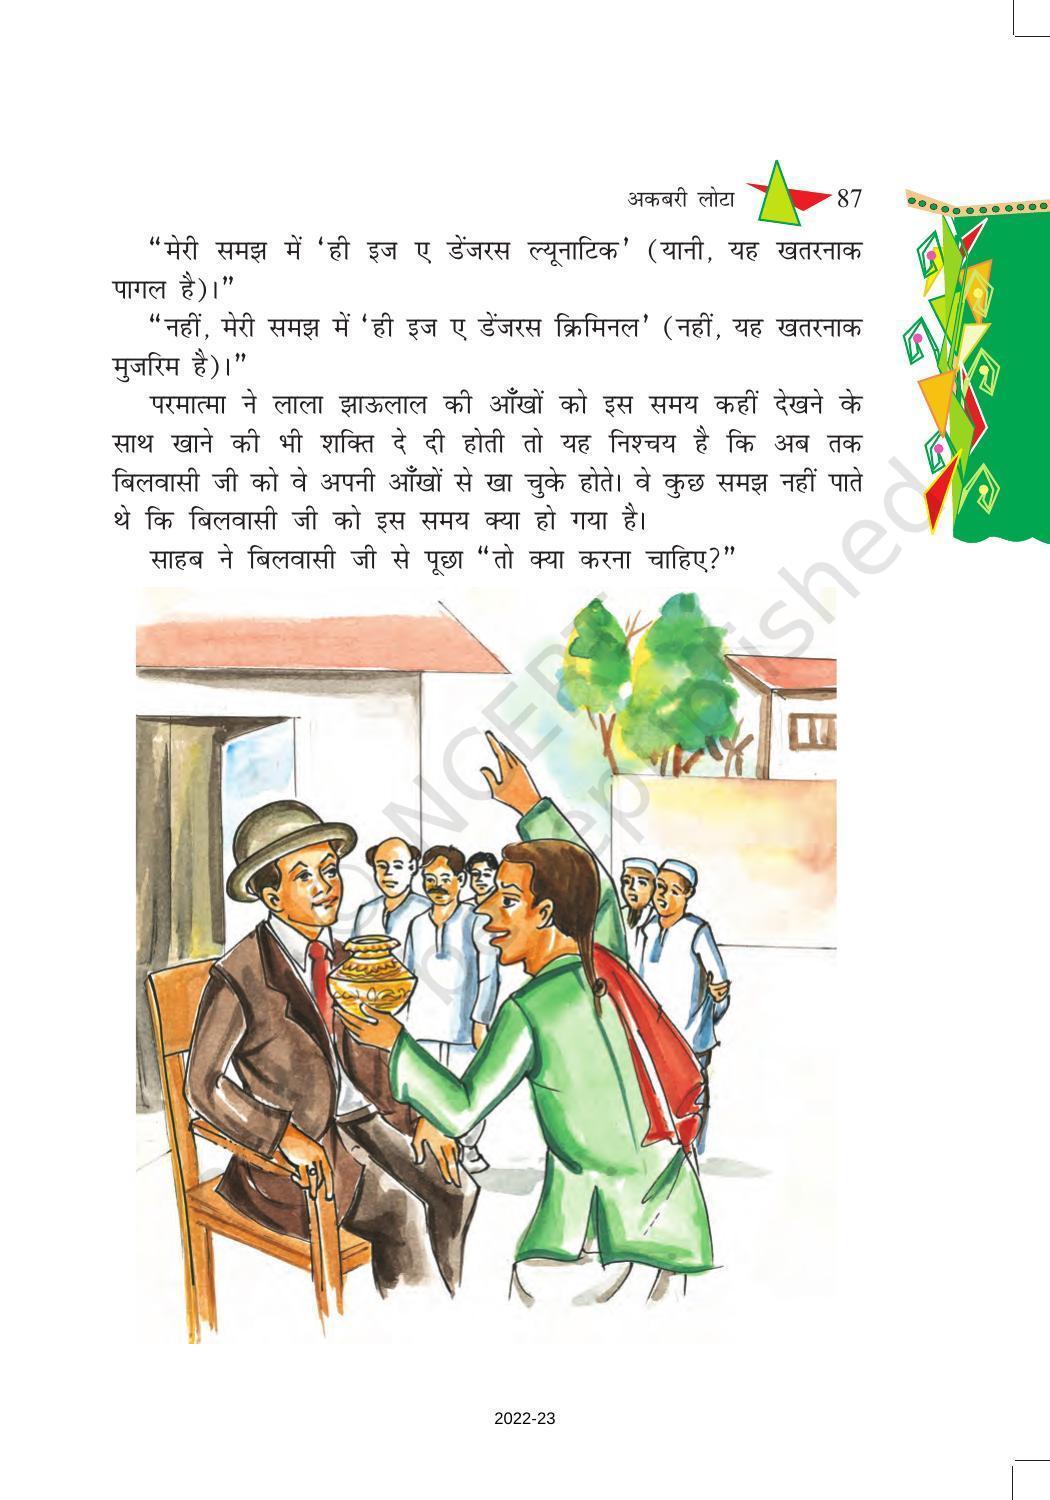 NCERT Book for Class 8 Hindi Vasant Chapter 14 अकबरी लोटा - Page 5